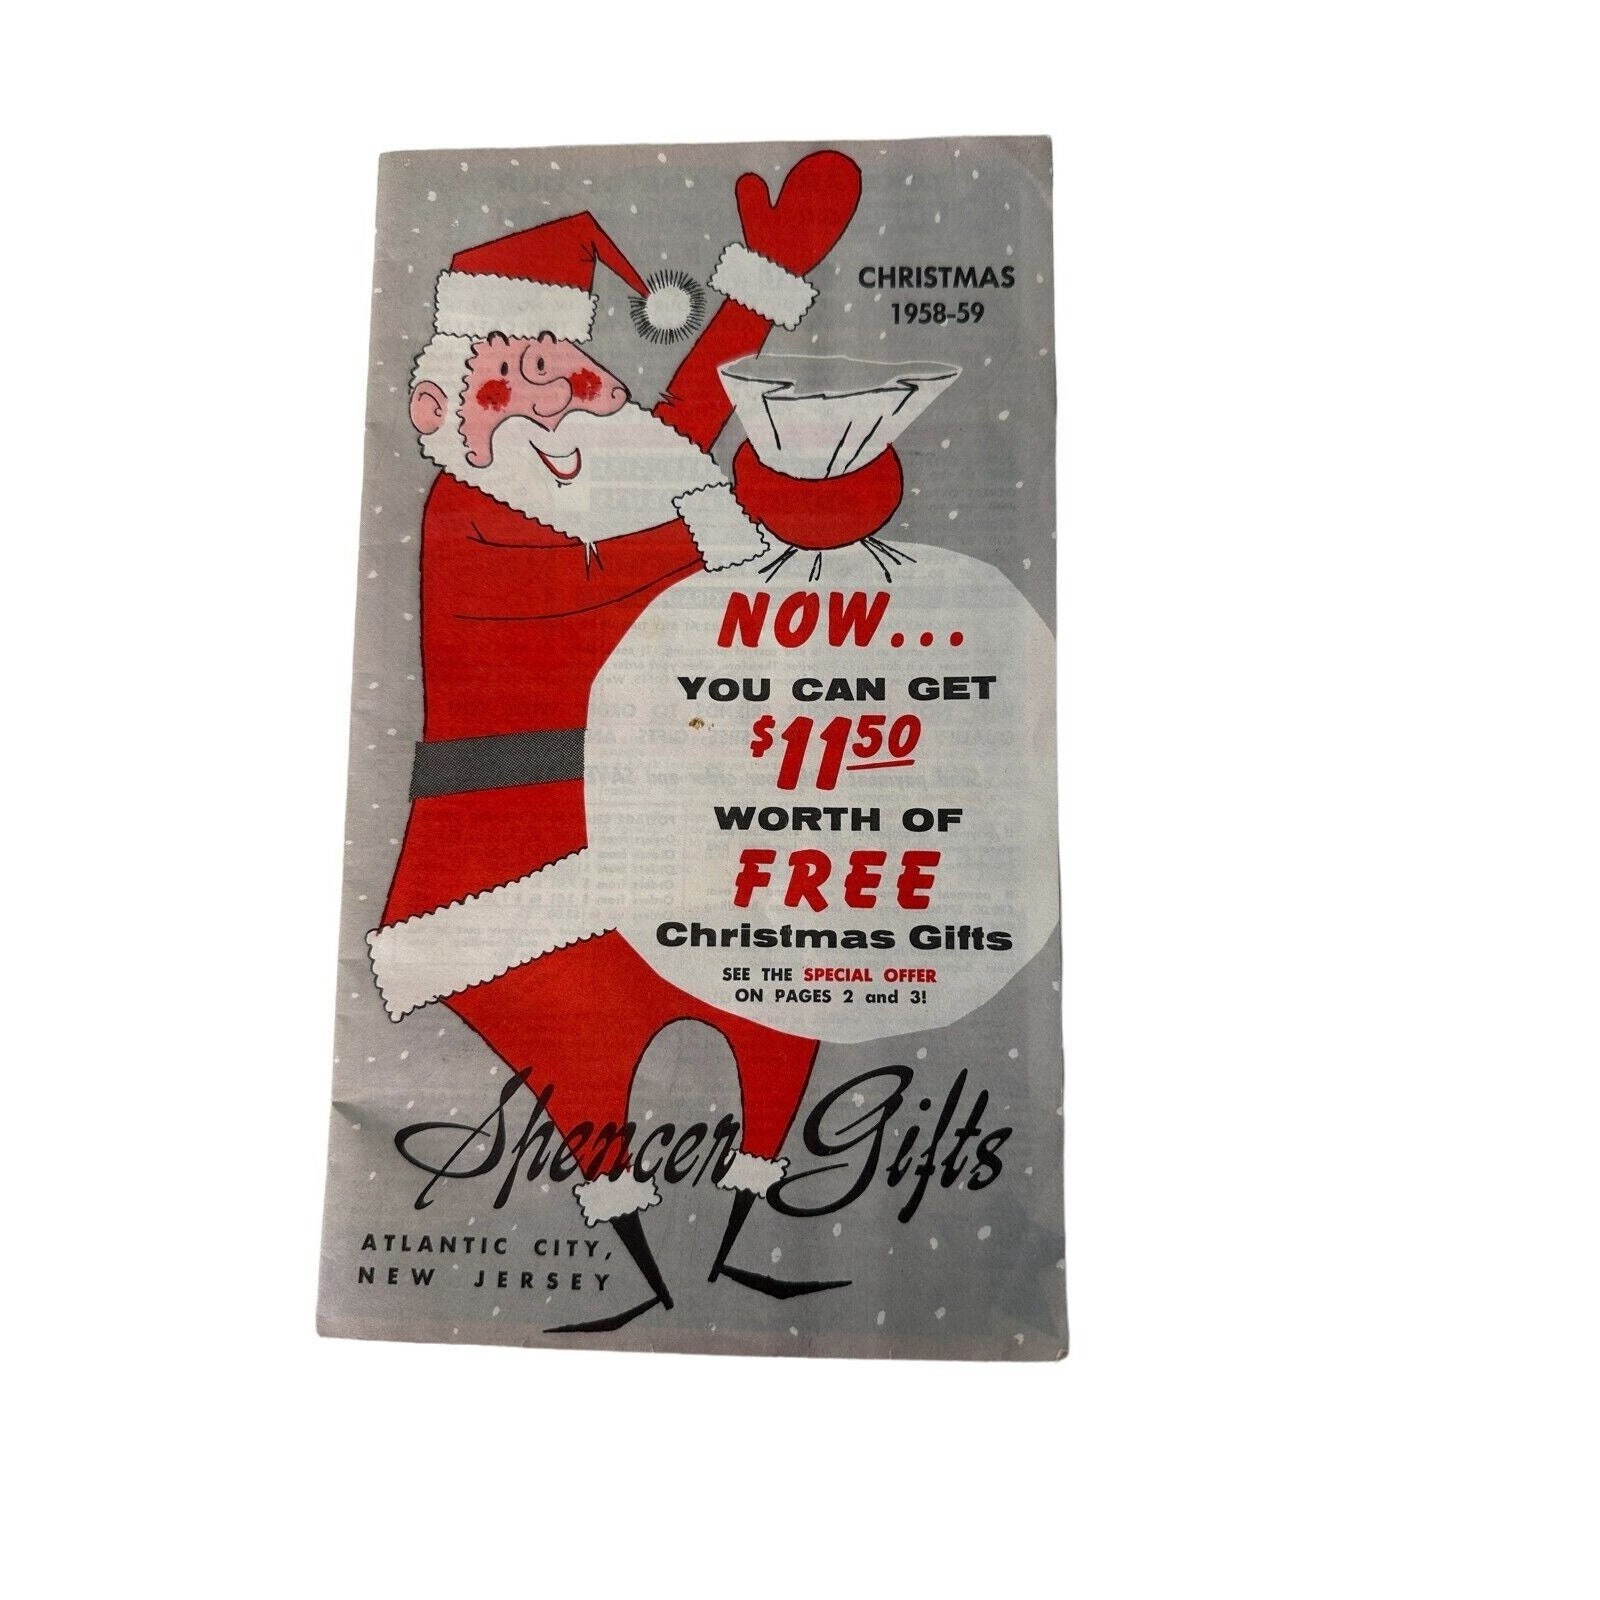 Vintage Advertising Spencer Gifts Catalog Christmas 1950s / 1958-59 Kitsch  Gifts & Vintage Housewares